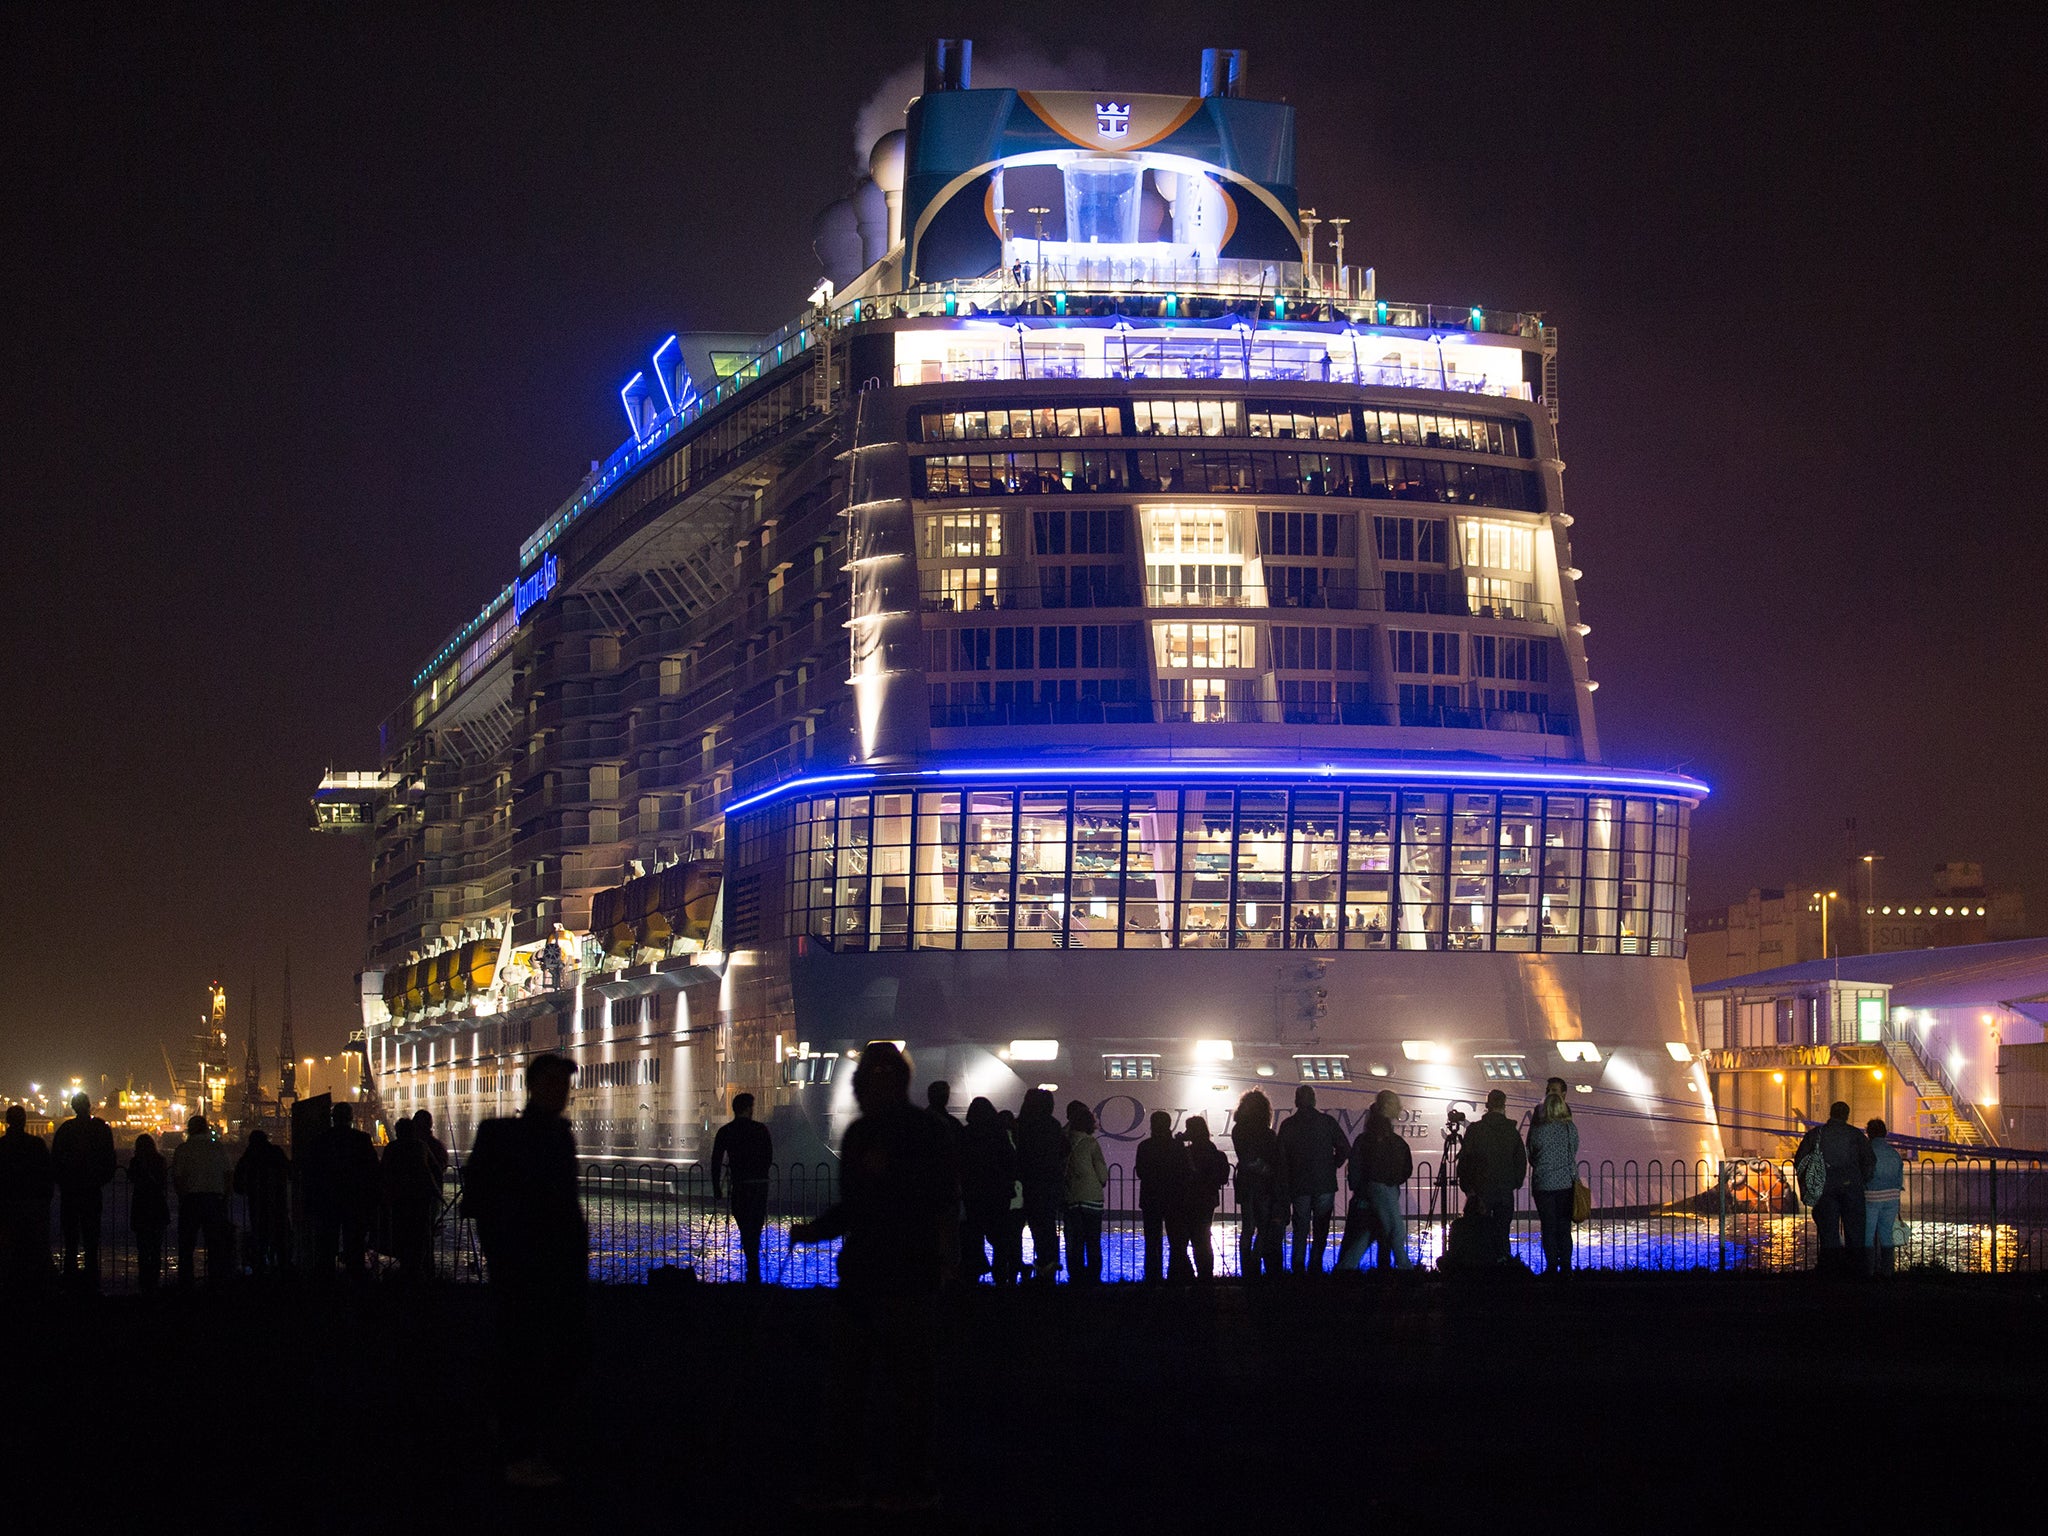 It's been billed as the smartest cruise ship: Quantum of the Seas